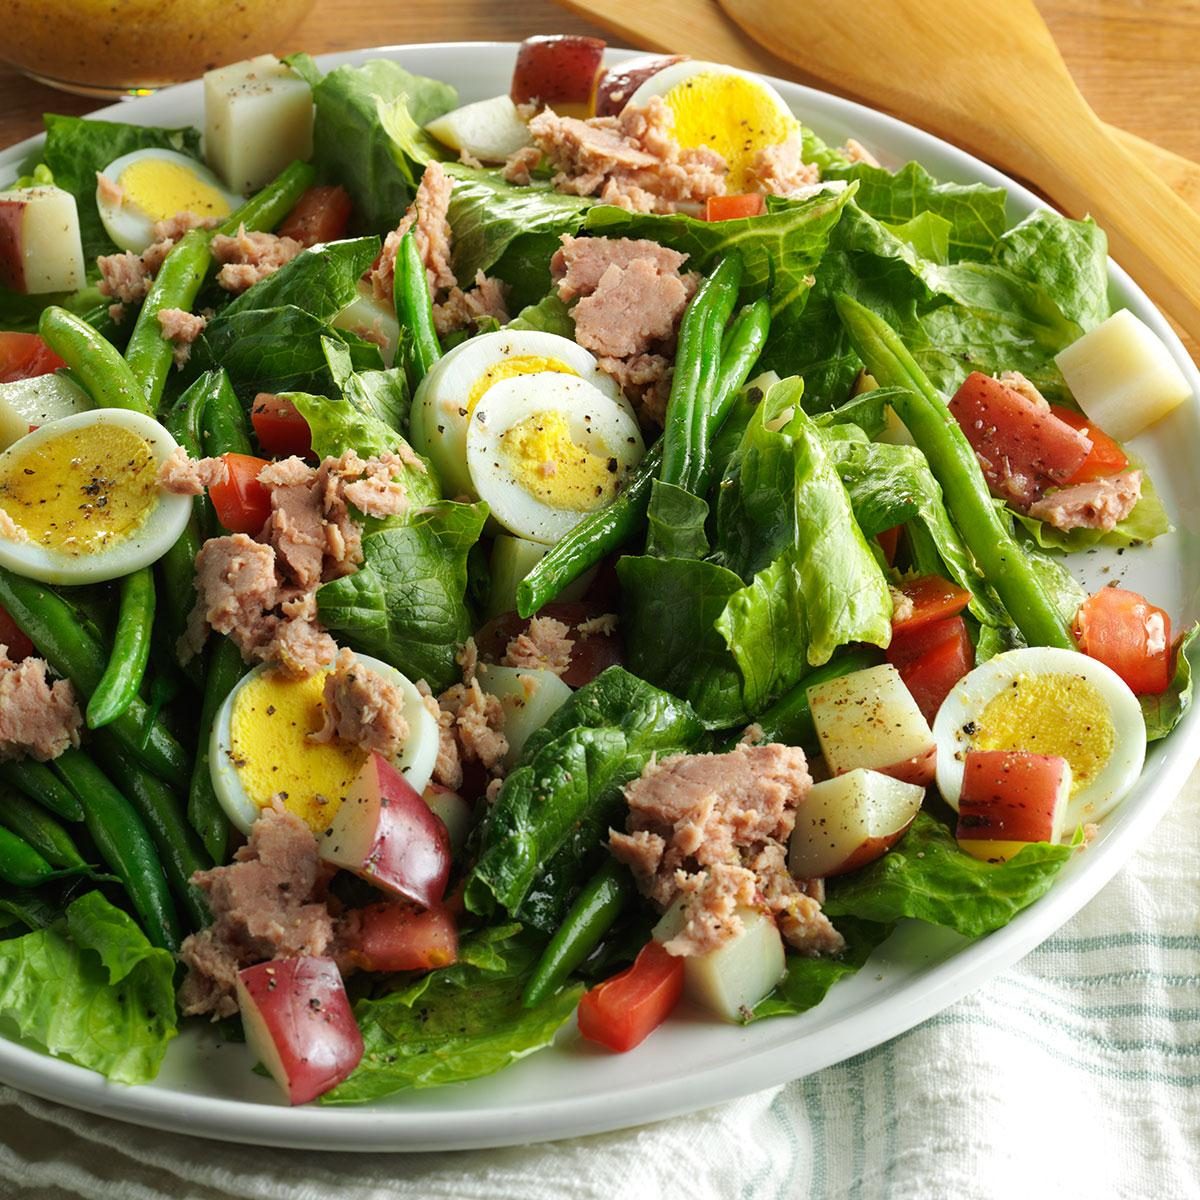 <p>Like the French, I pack my classic Nicoise salad with veggies, potatoes, tuna and eggs. Cooking the potatoes and beans together helps the dish come together fast. —Valerie Belley, St. Louis, Missouri</p> <div class="listicle-page__buttons"> <div class="listicle-page__cta-button"><a href='https://www.tasteofhome.com/recipes/quick-nicoise-salad/'>Get Recipe</a></div> </div>